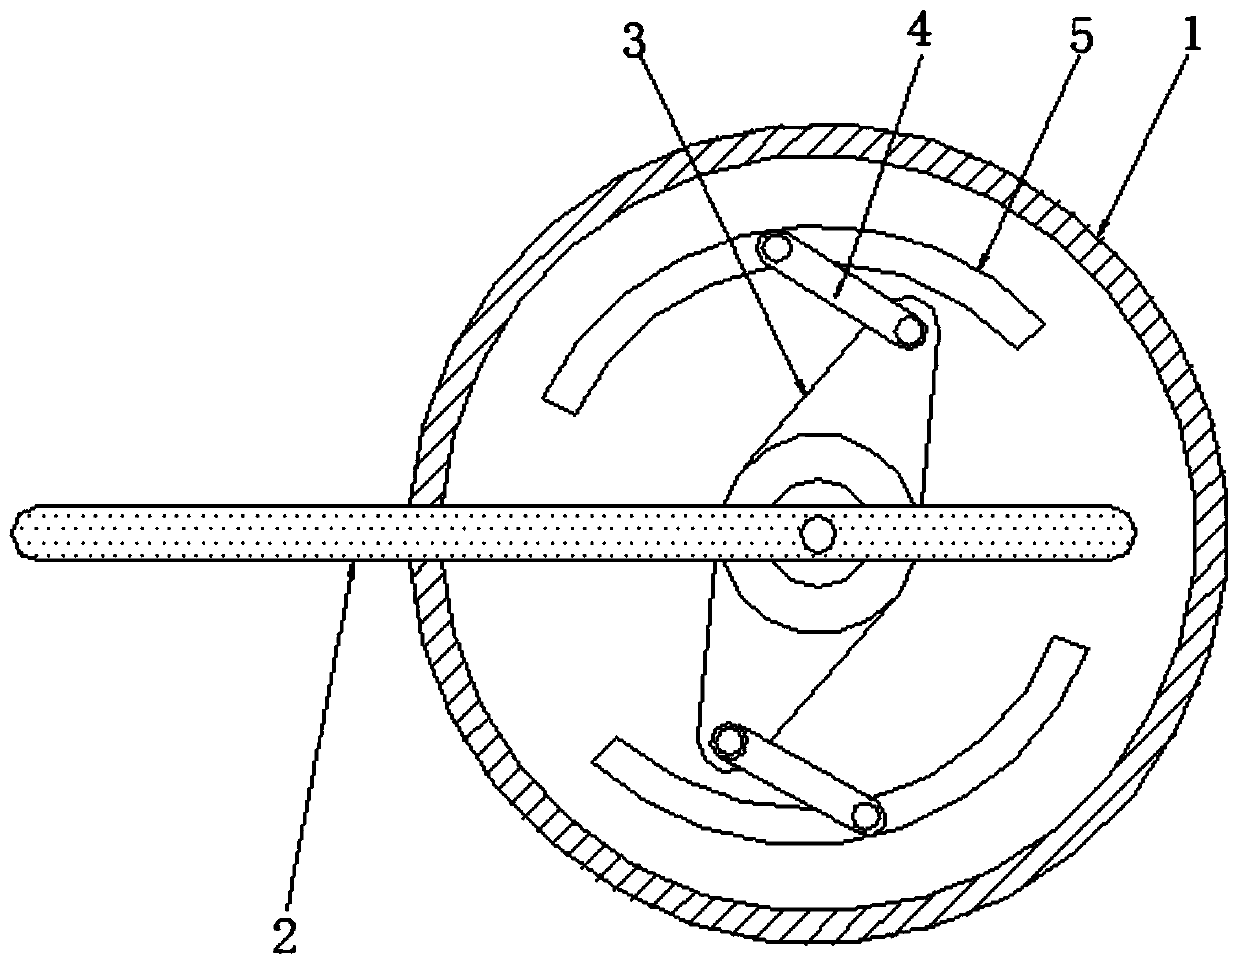 Device for clamping tires of different sizes based on dual centering motion